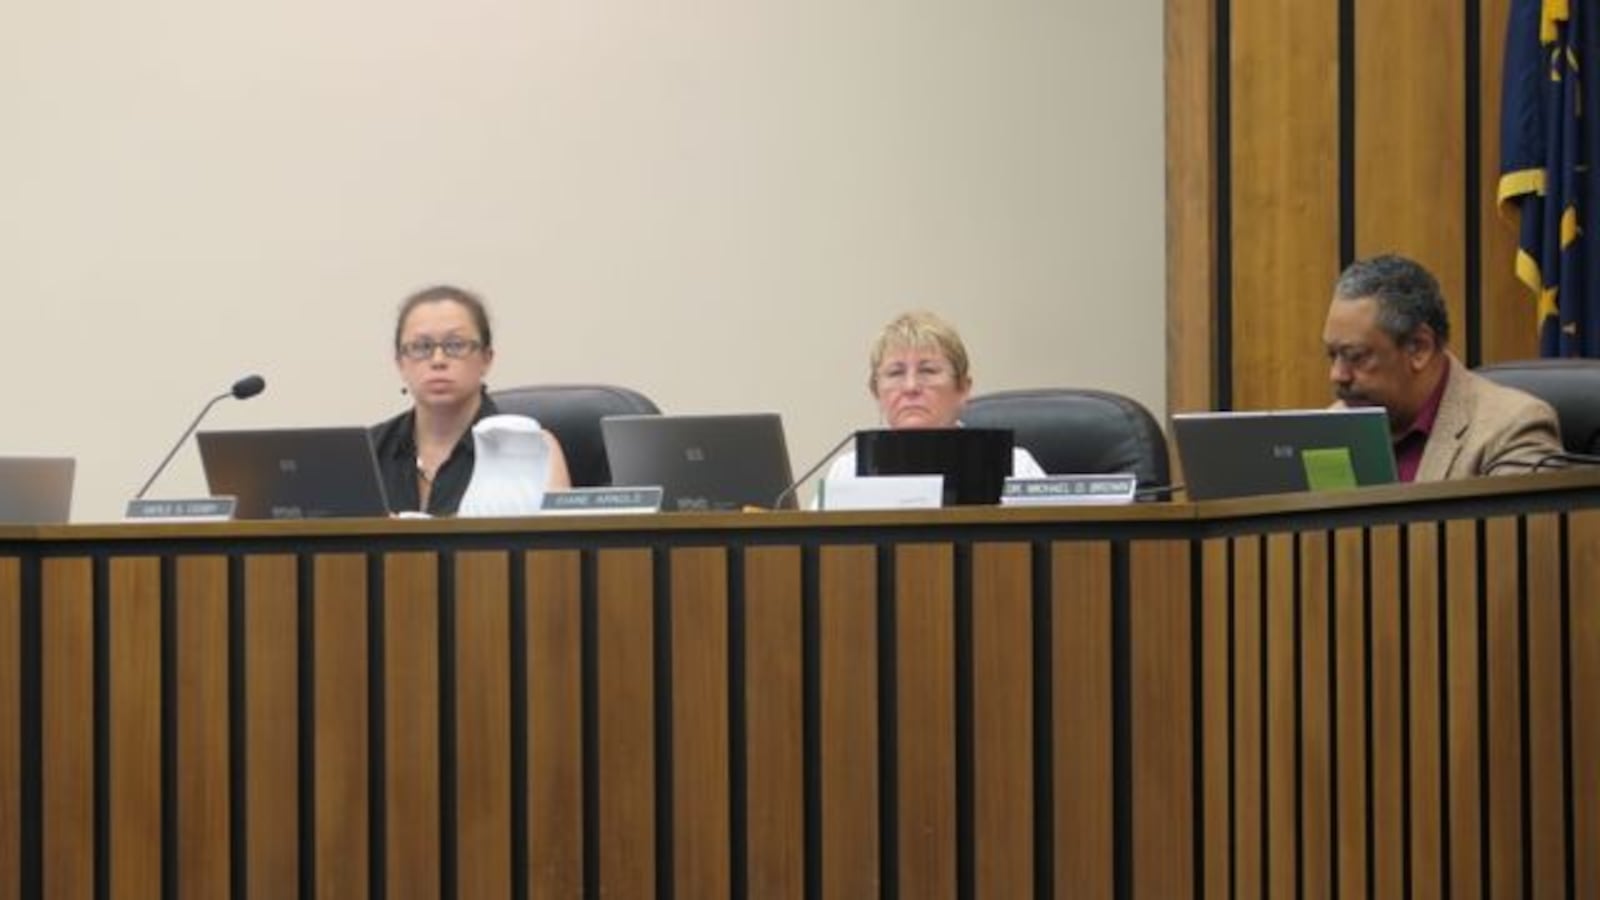 Indianapolis Public School Board members Gayle Cosby, Diane Arnold and Michael Brown discuss district issues at a July school board meeting.